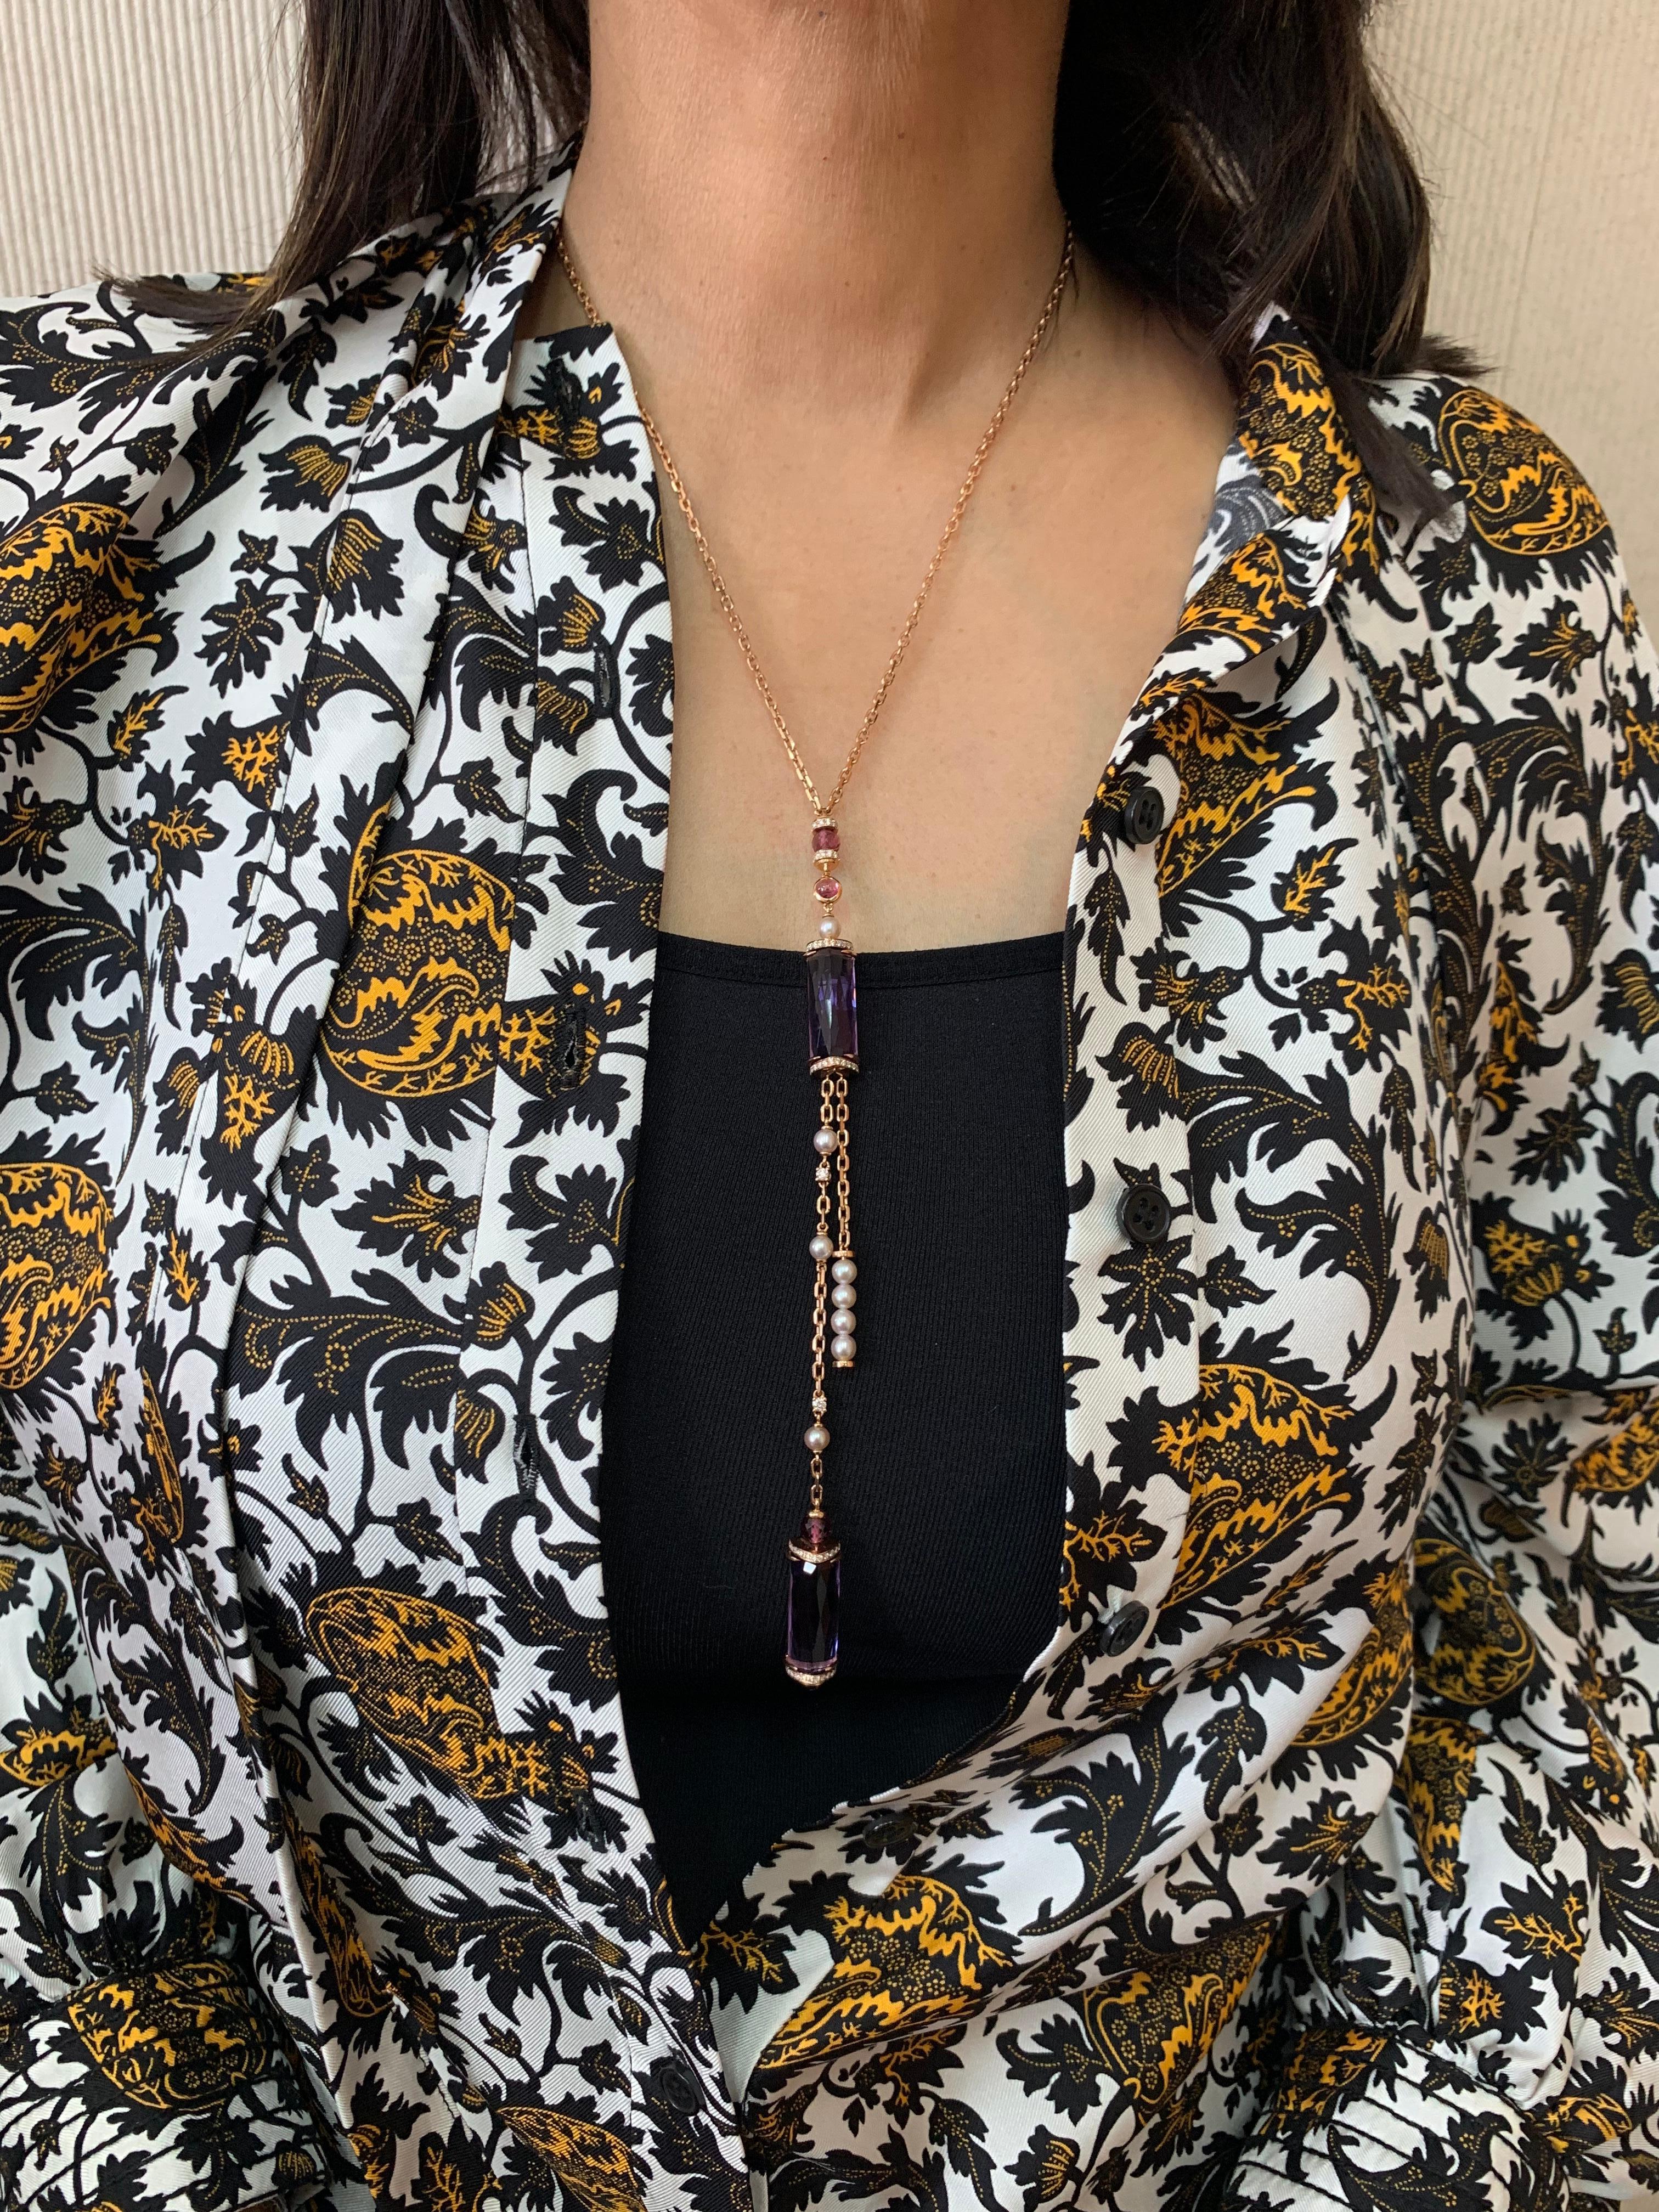 This is a chic amethyst lariat necklace in a unique baguette briolette cut to accentuate the beauty of the gemstone. This is a light and fun lariat necklace with a pop of color with the use of these elongated gems. The necklace is given subtle yet